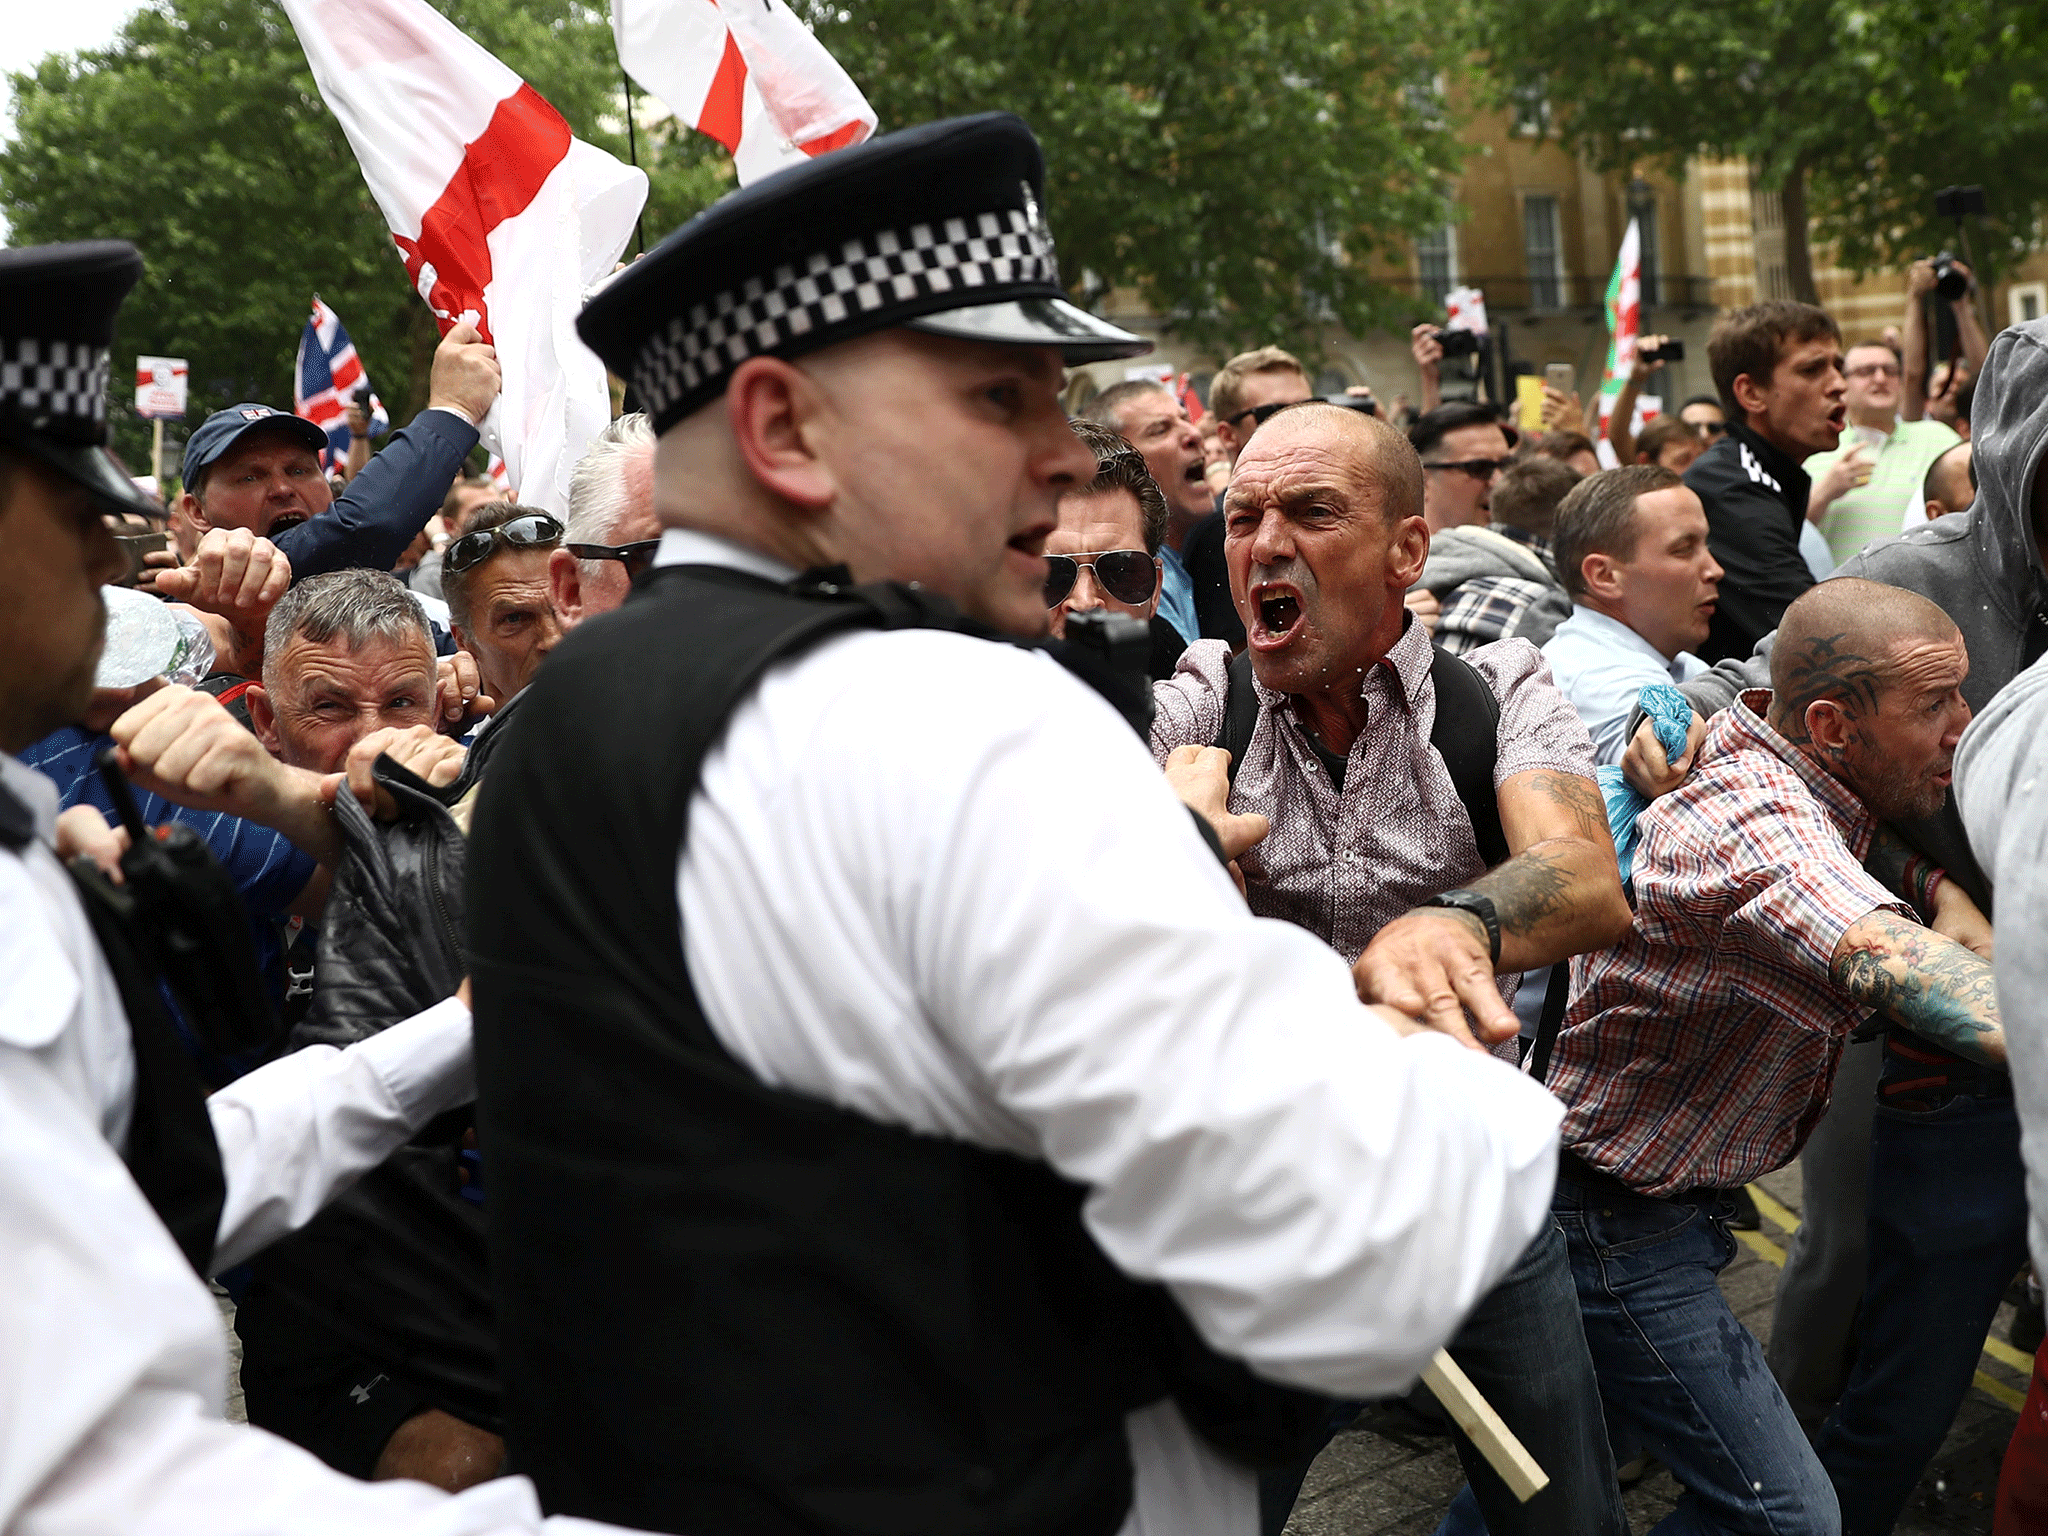 Tommy Robinson supporters perform Nazi salutes at violent protest